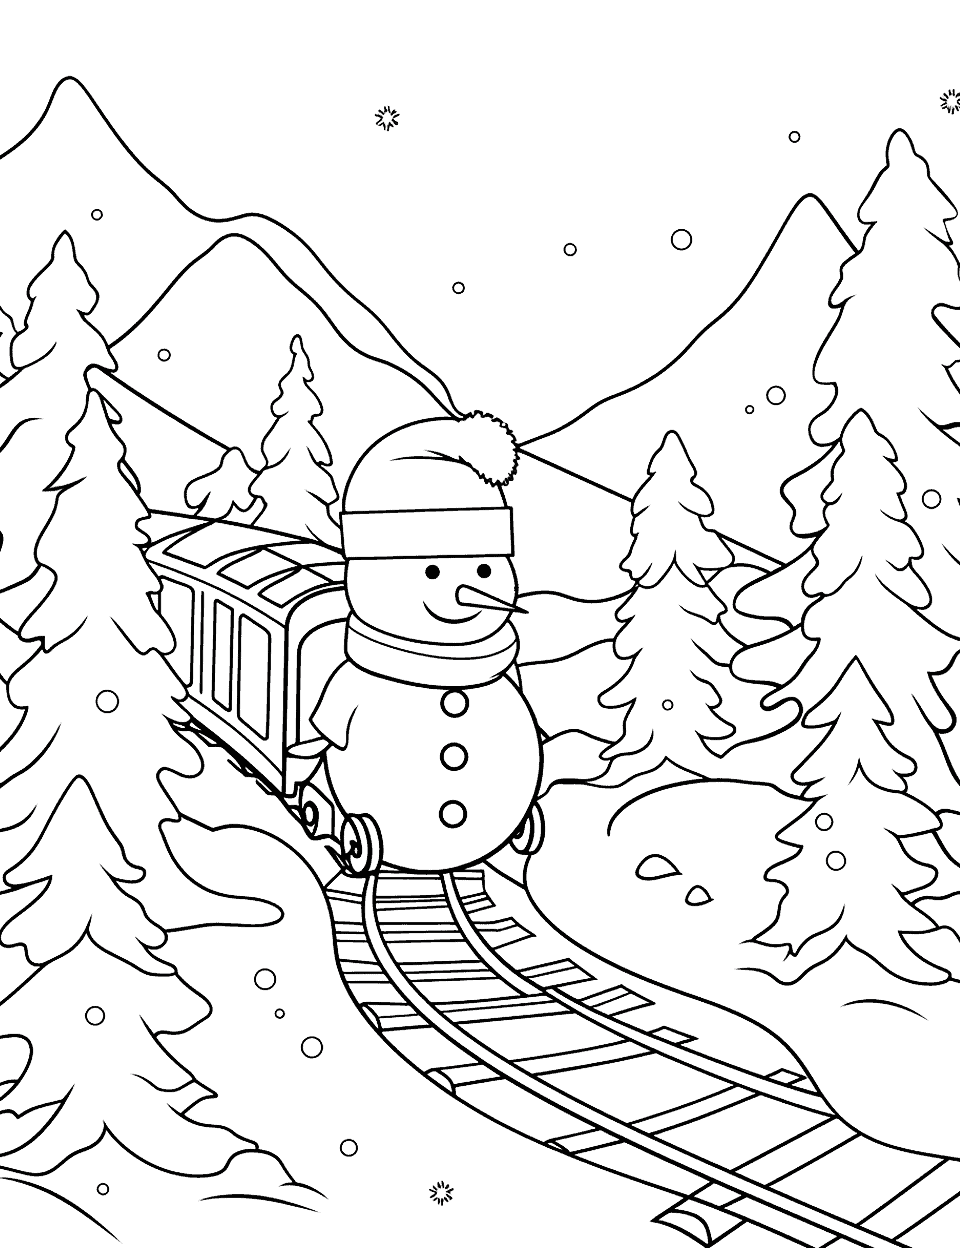 Holiday Train Ride Winter Coloring Page - A scenic train ride through snowy mountains, with holiday decorations in the train.